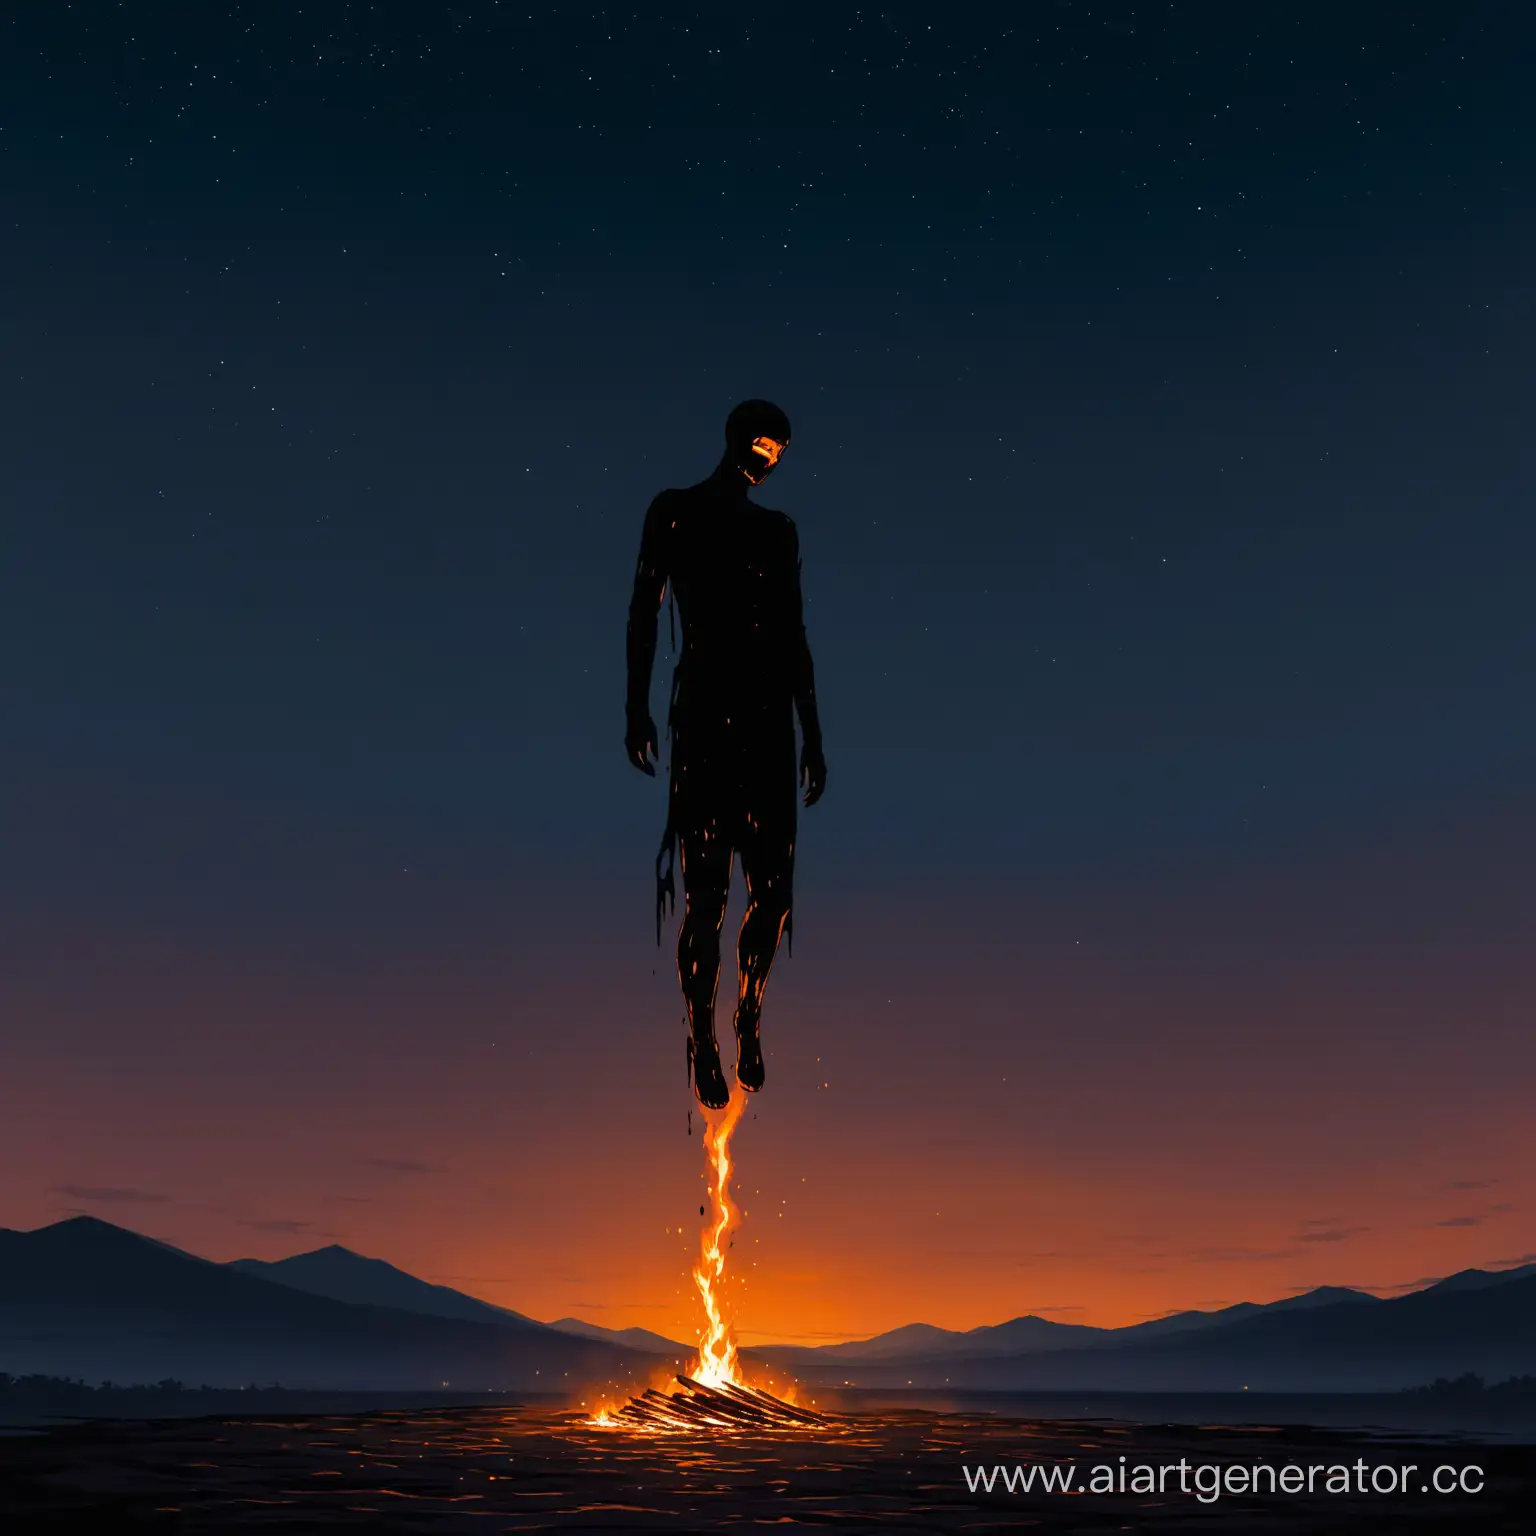 Dramatic-Silhouette-of-a-Falling-Charred-Figure-in-Predawn-Sky